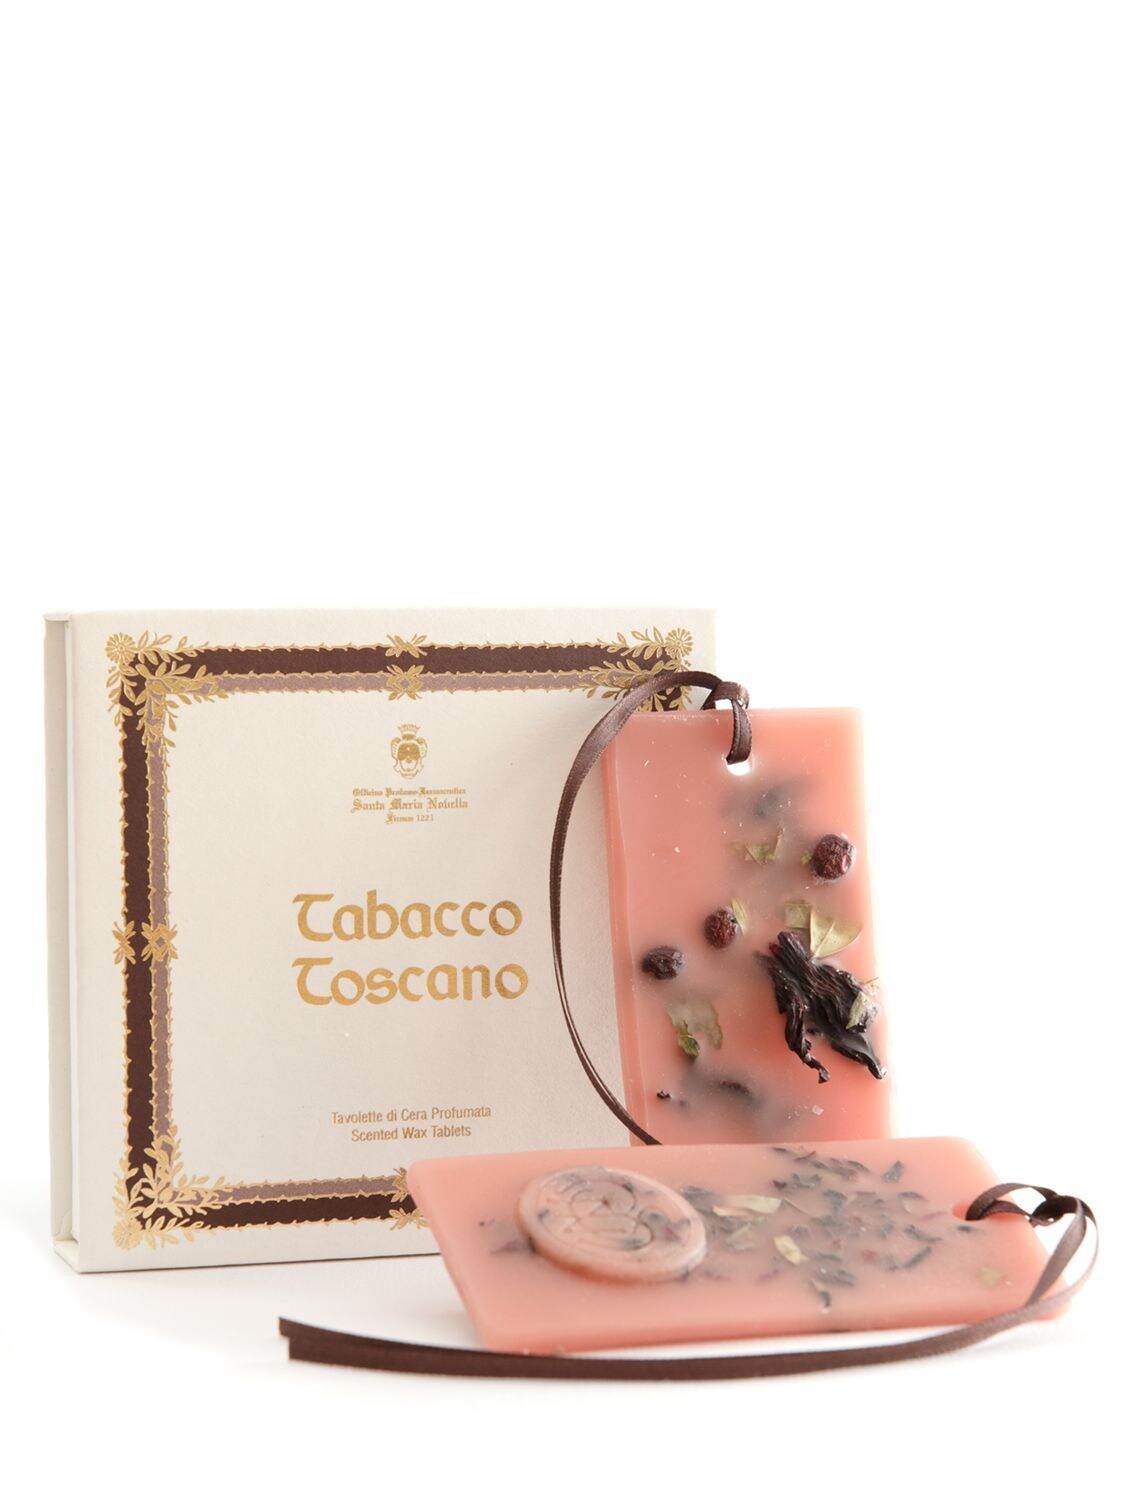 Image of Tabacco Toscano Scented Wax Tablets